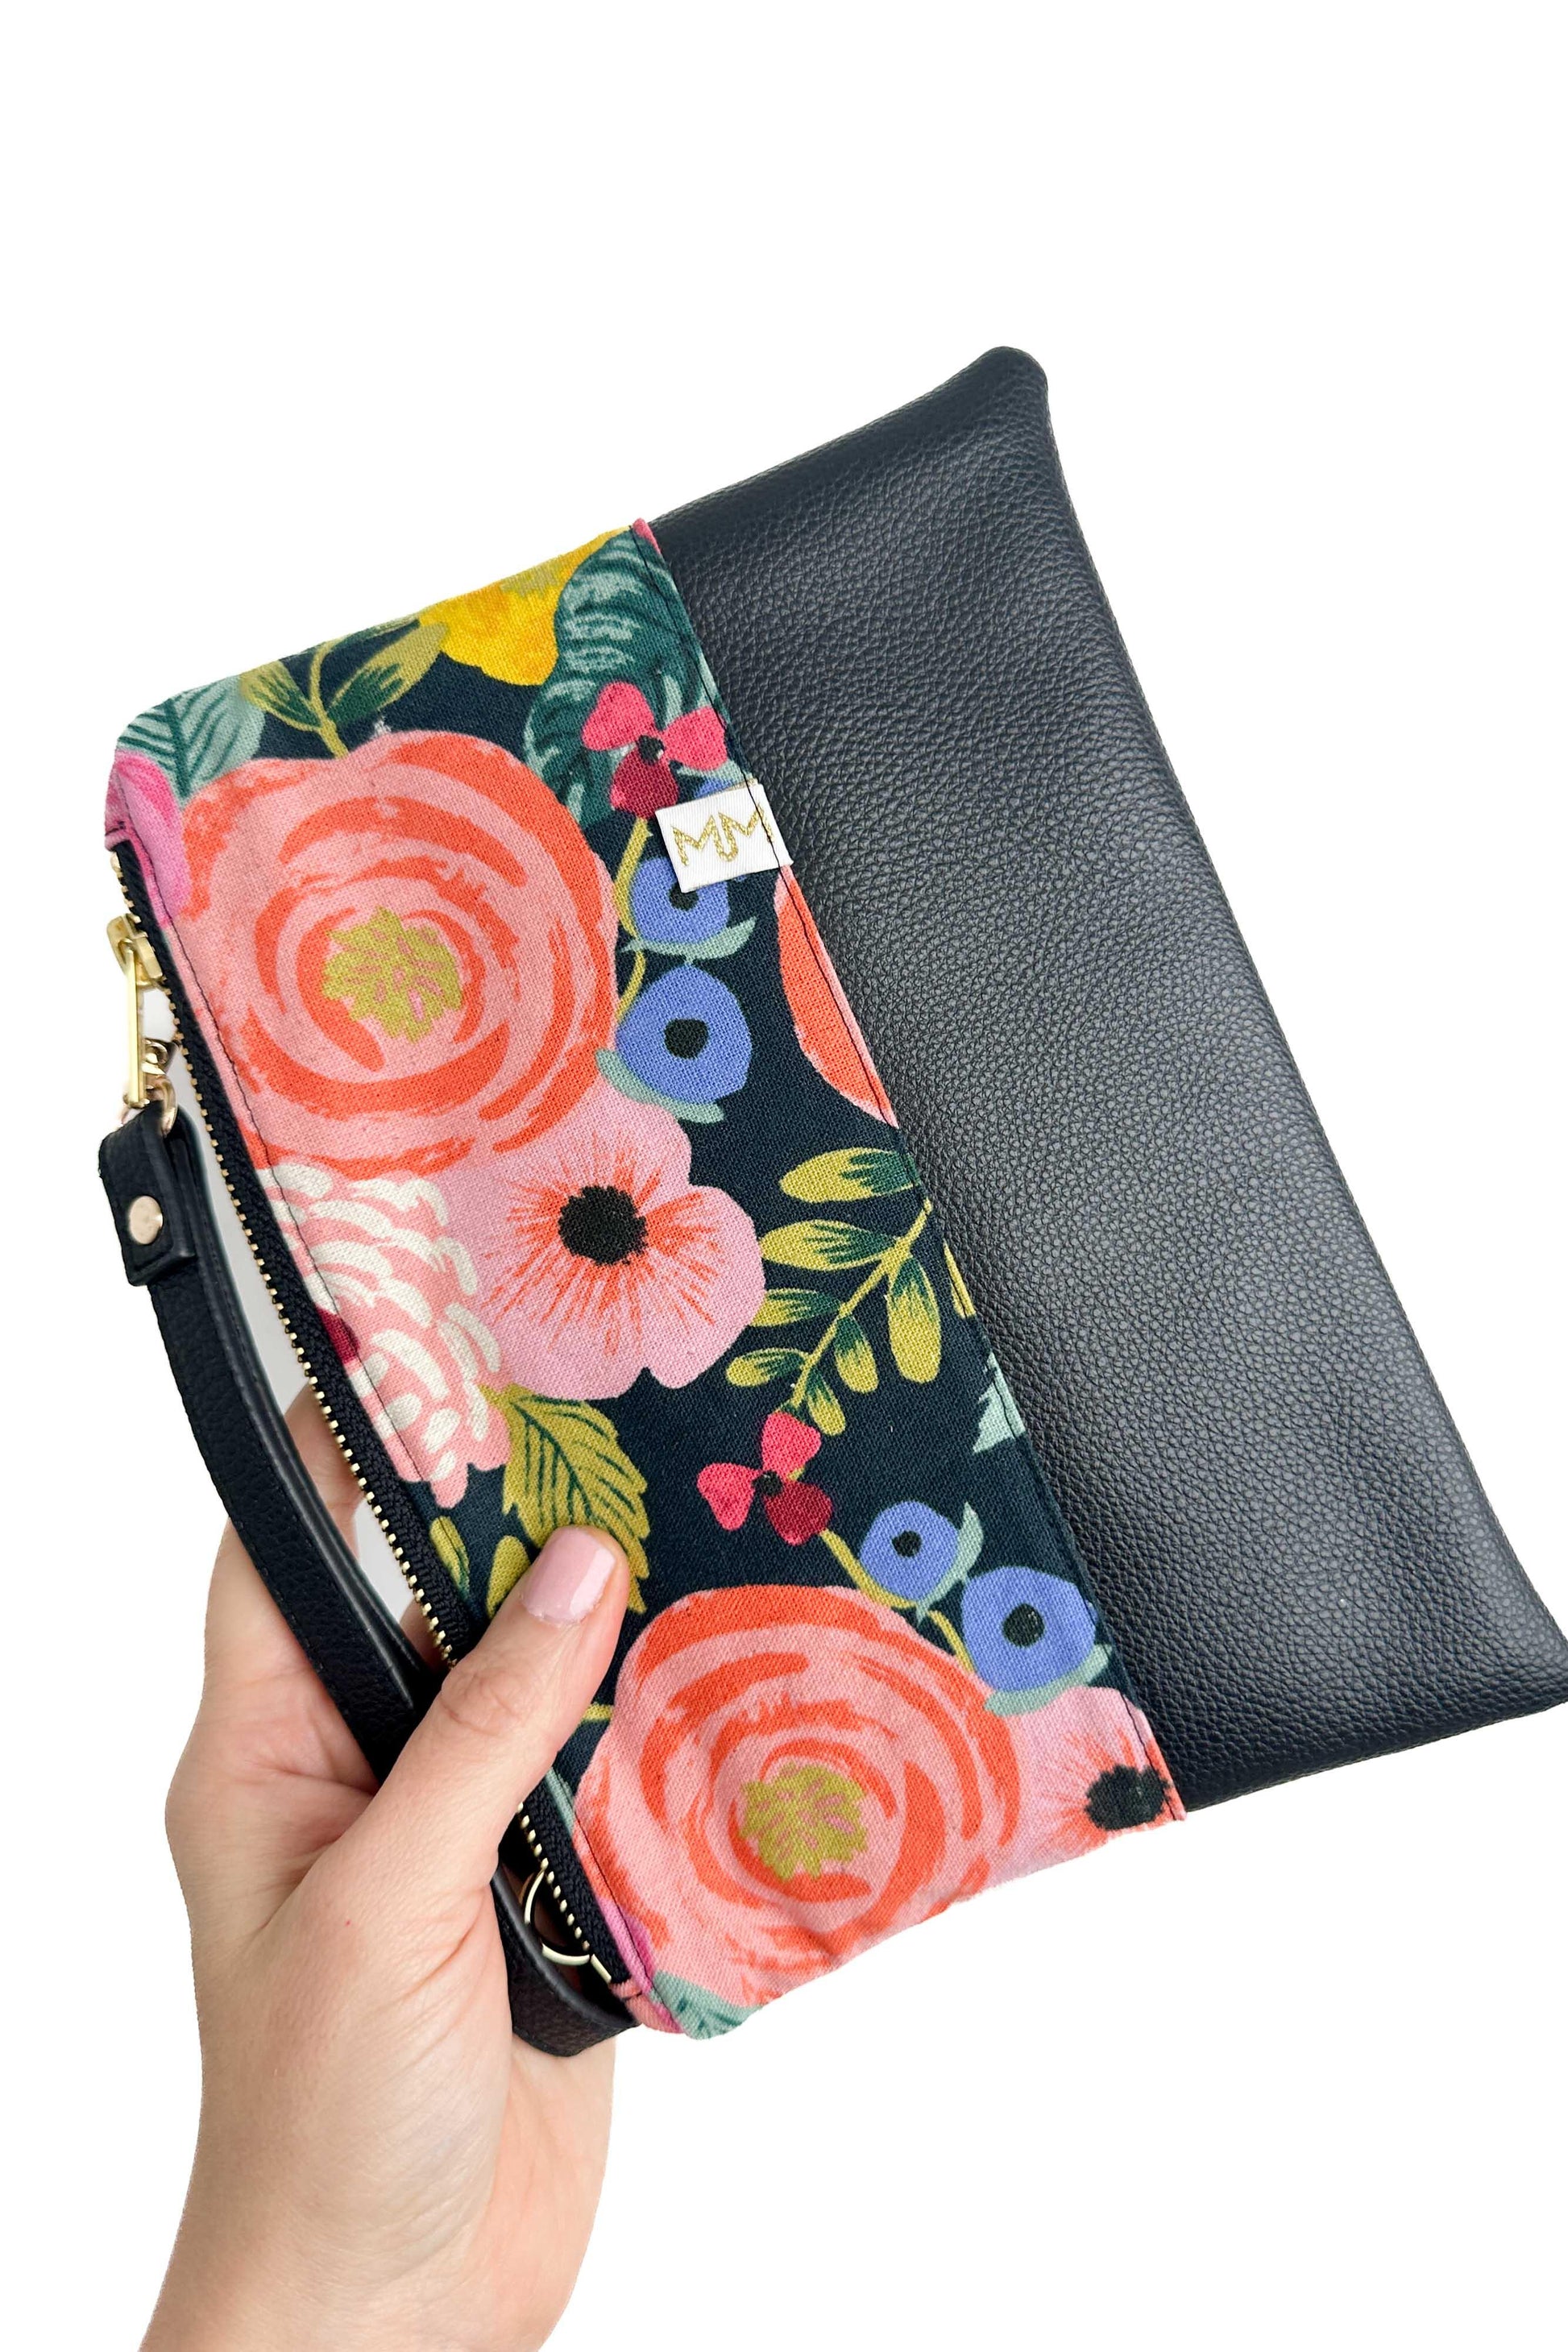 Evening Garden Black Convertible Crossbody Wristlet+ with Compartments READY TO SHIP - Modern Makerie